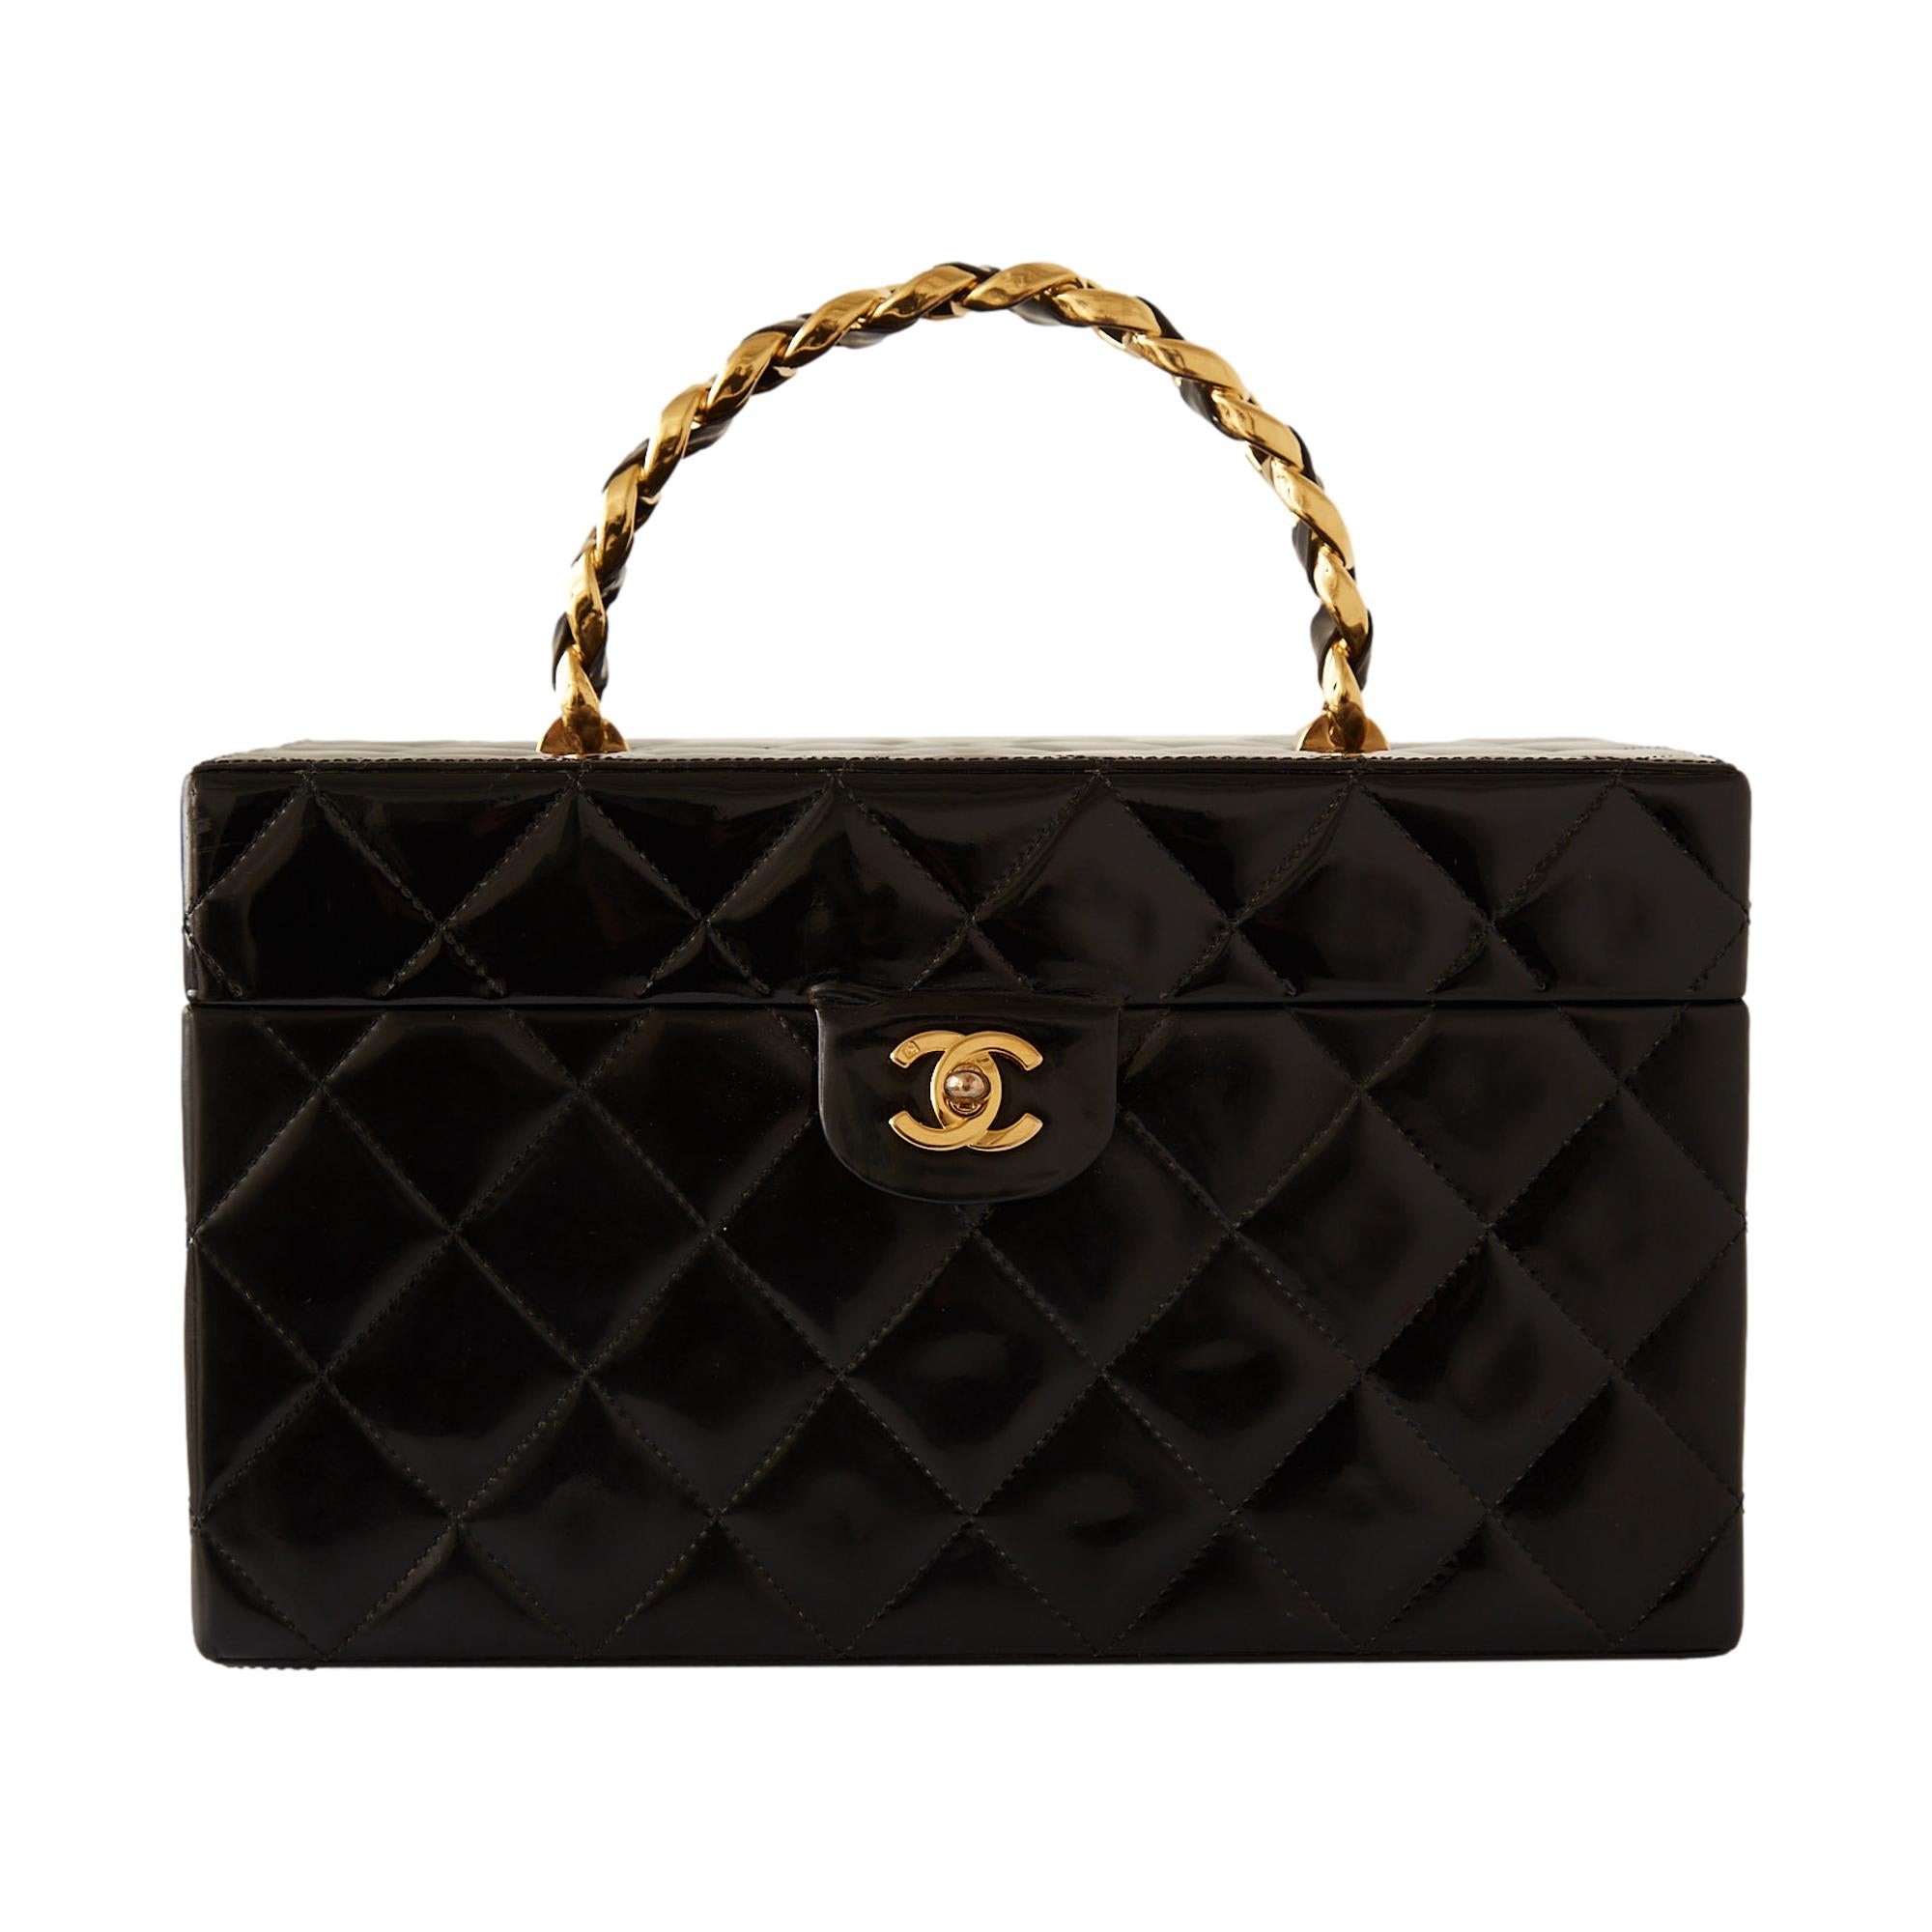 Chanel Black Jumbo Quilted Patent Vanity Bag